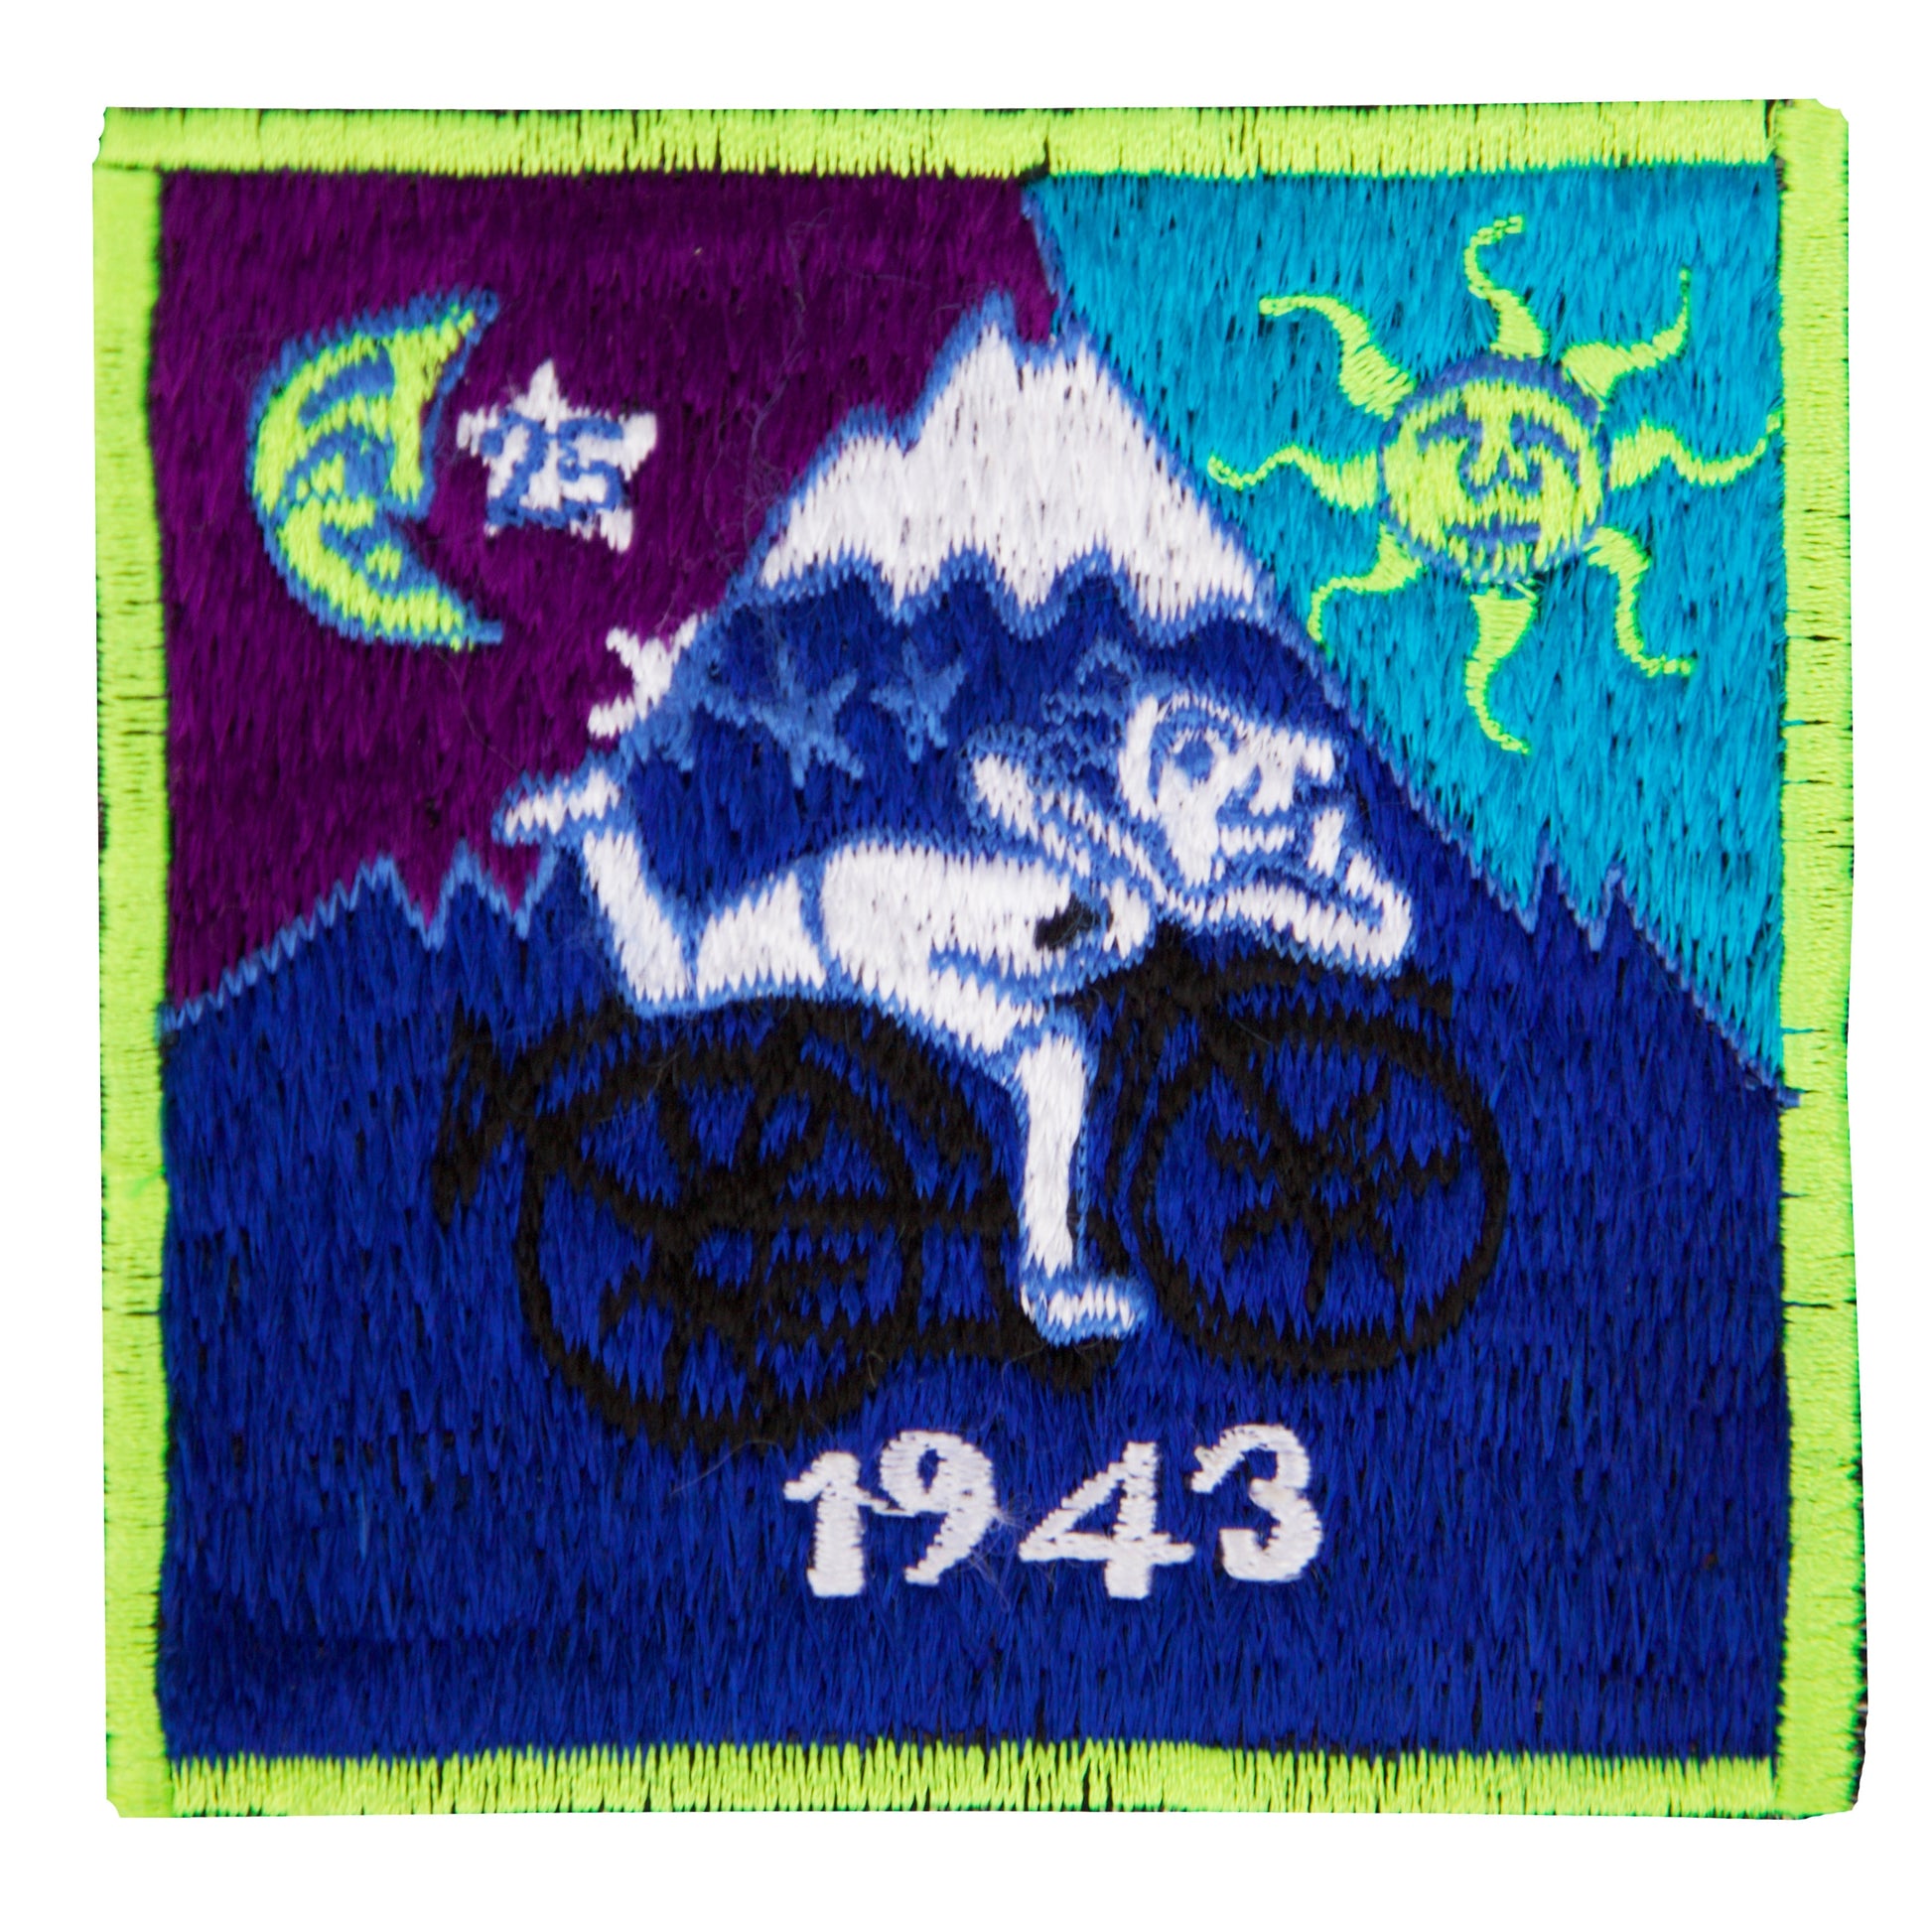 Blue Bicycle Day LSD Patch blacklight vintage embroidery Albert Hofmann 1943 Psychedelic  Hippie Visionary Drug Cosmic Healing Medicine